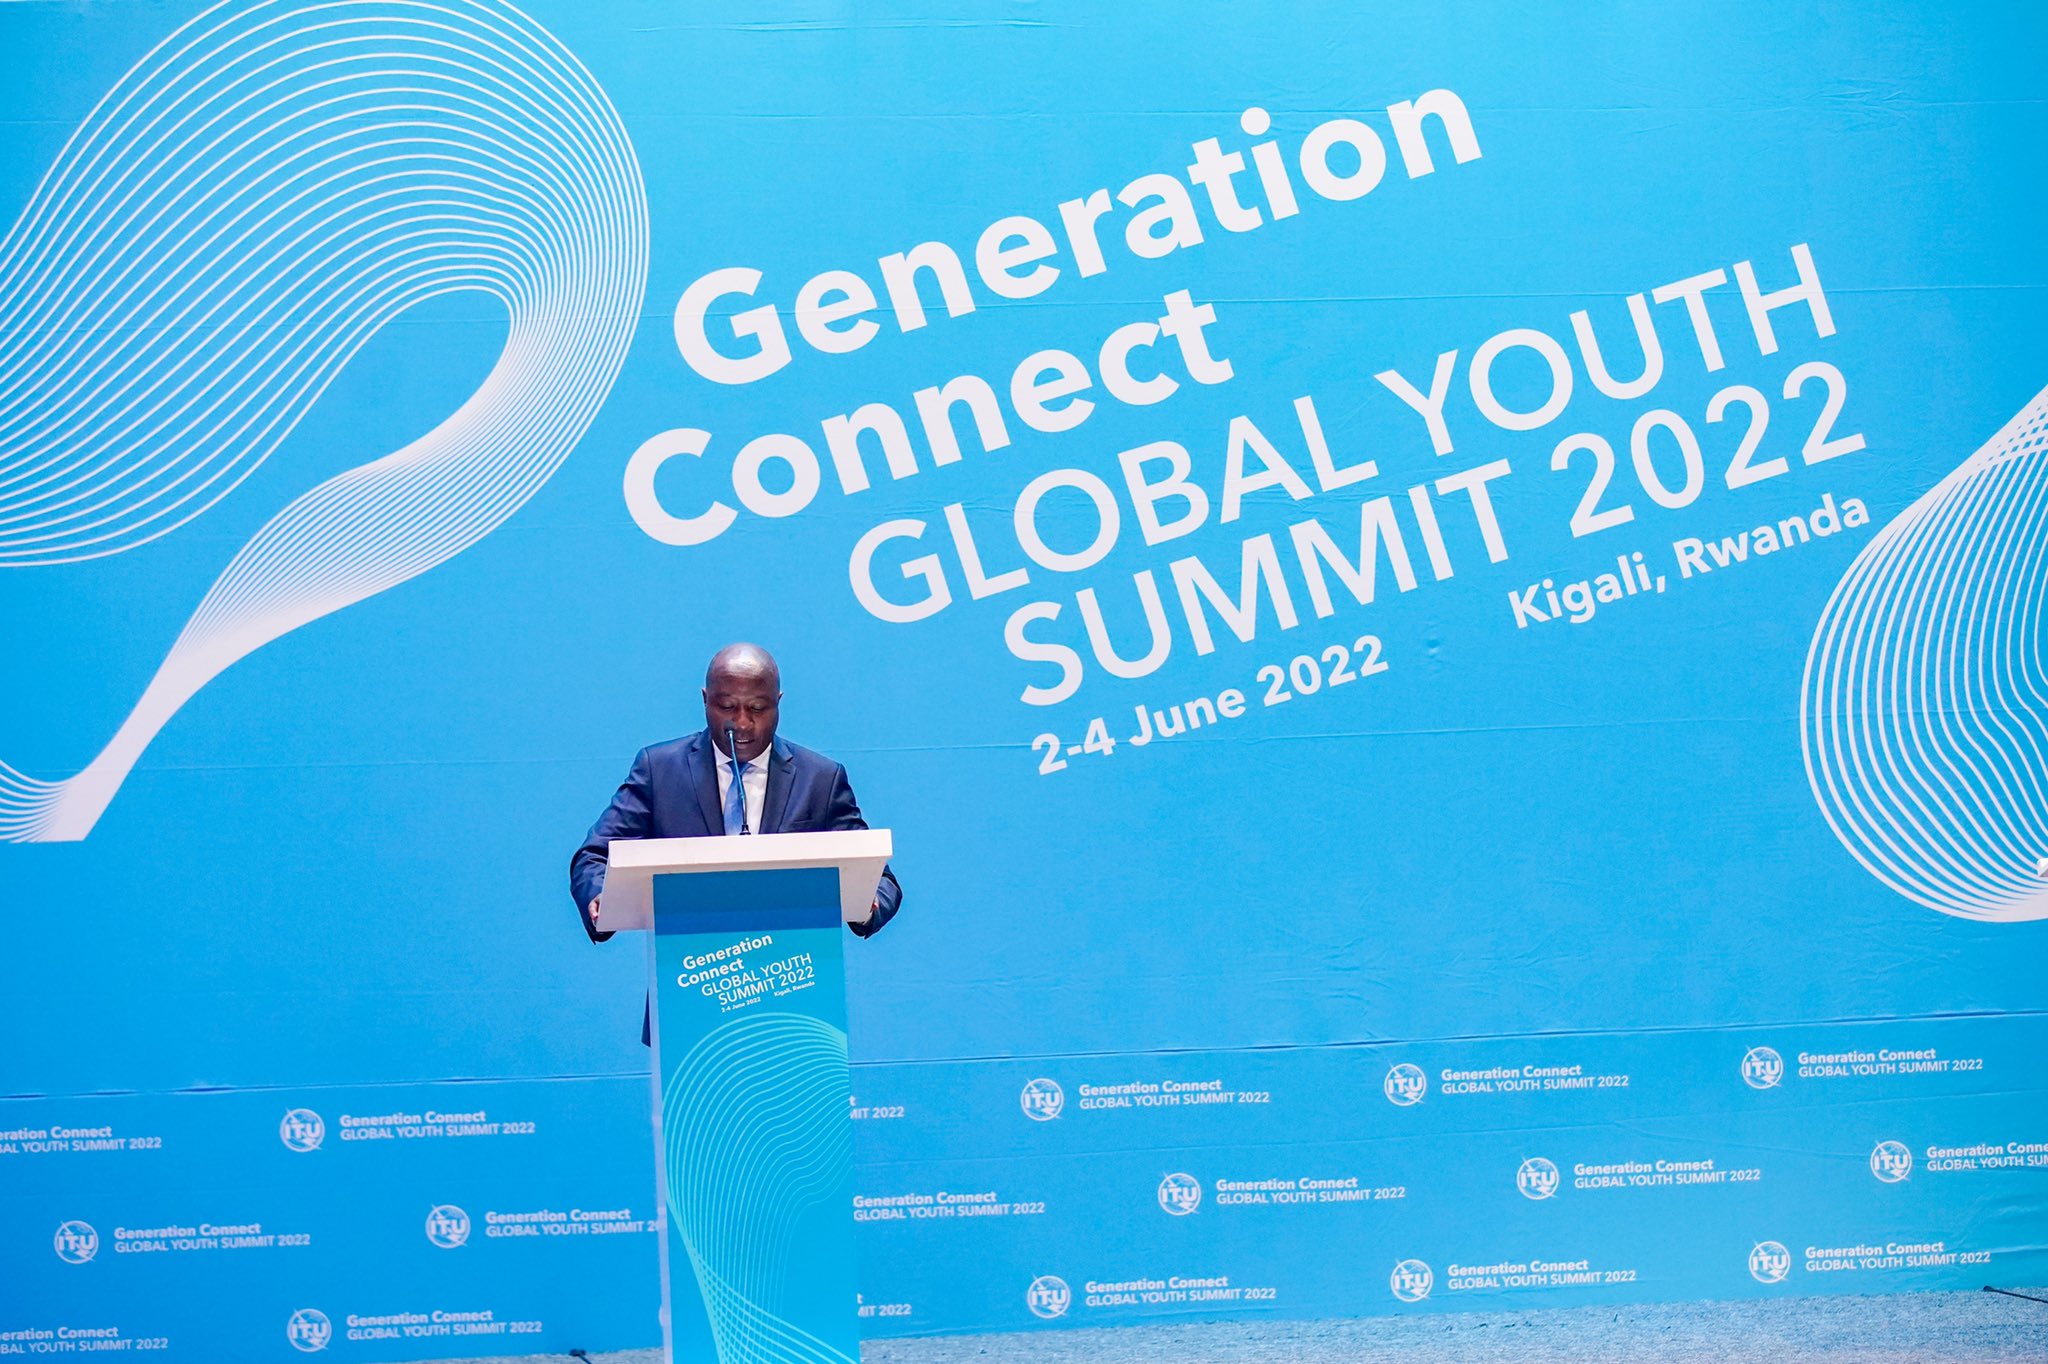 Prime Minister Edouard Ngirente delivers remarks during the inaugural Generation Connect Global Youth Summit in Kigali on June 2,2022. Courtesy